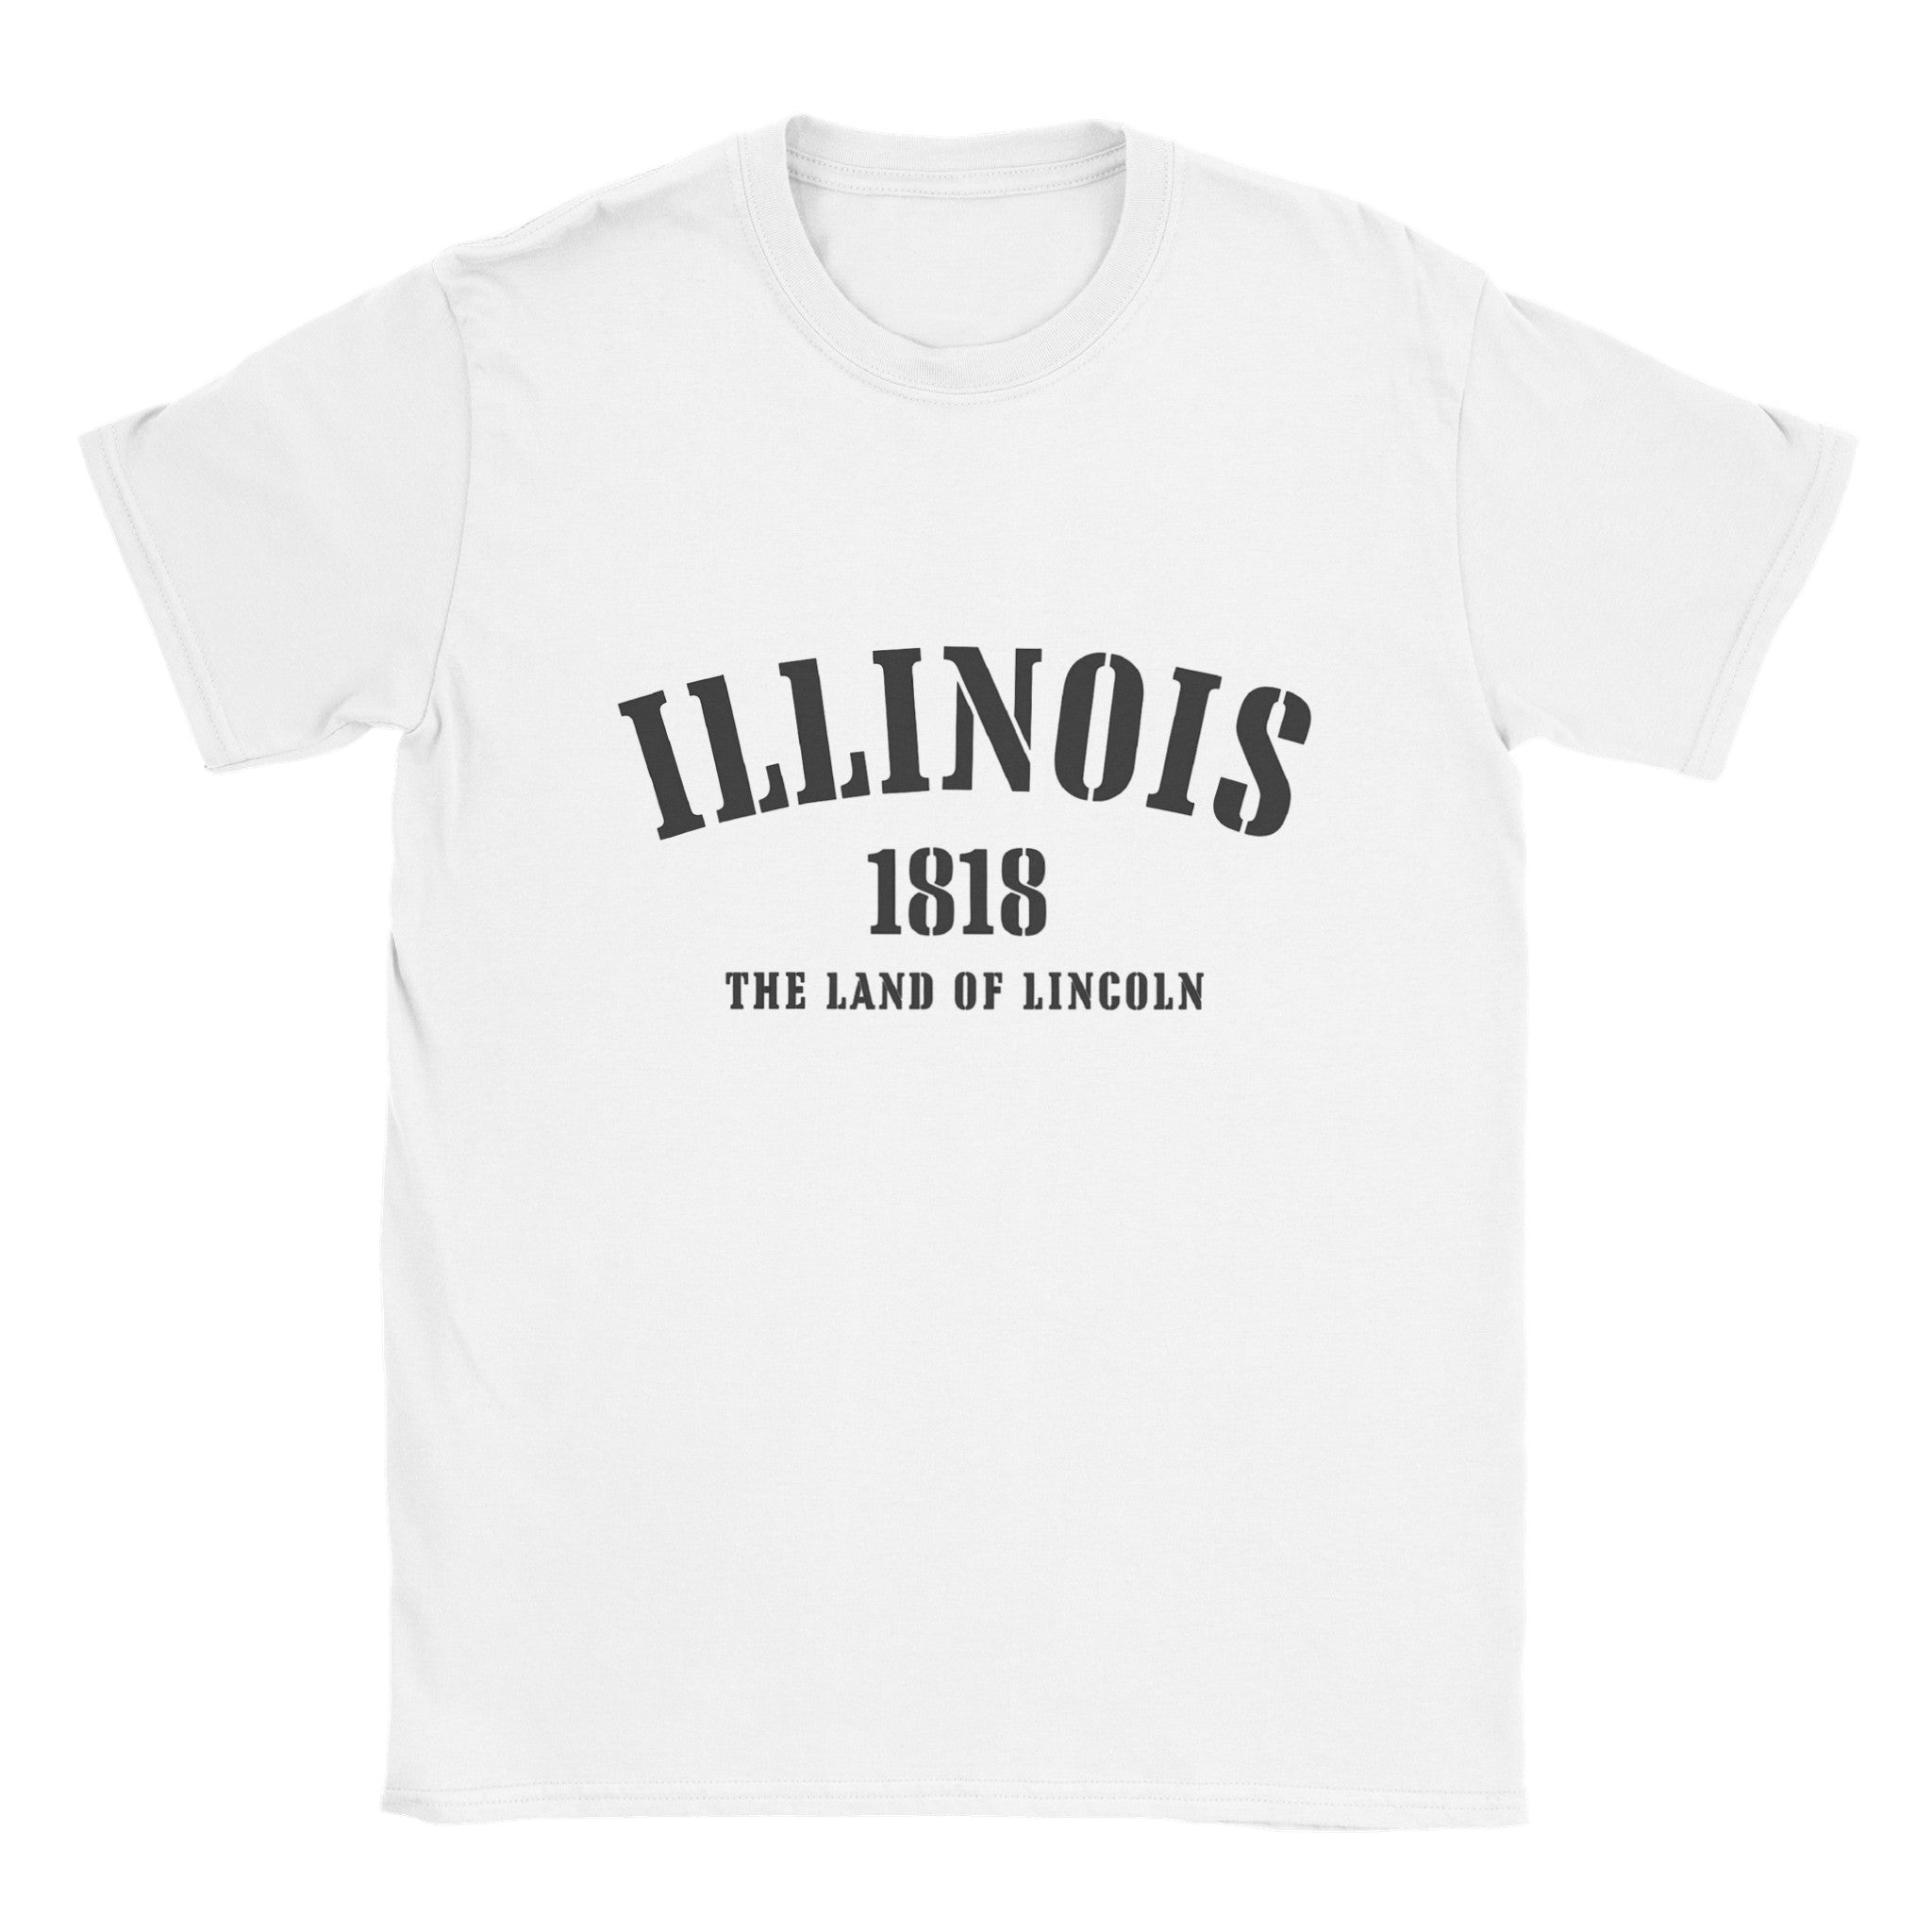 Illinois- Classic Unisex Crewneck States T-shirt - Creations by Chris and Carlos